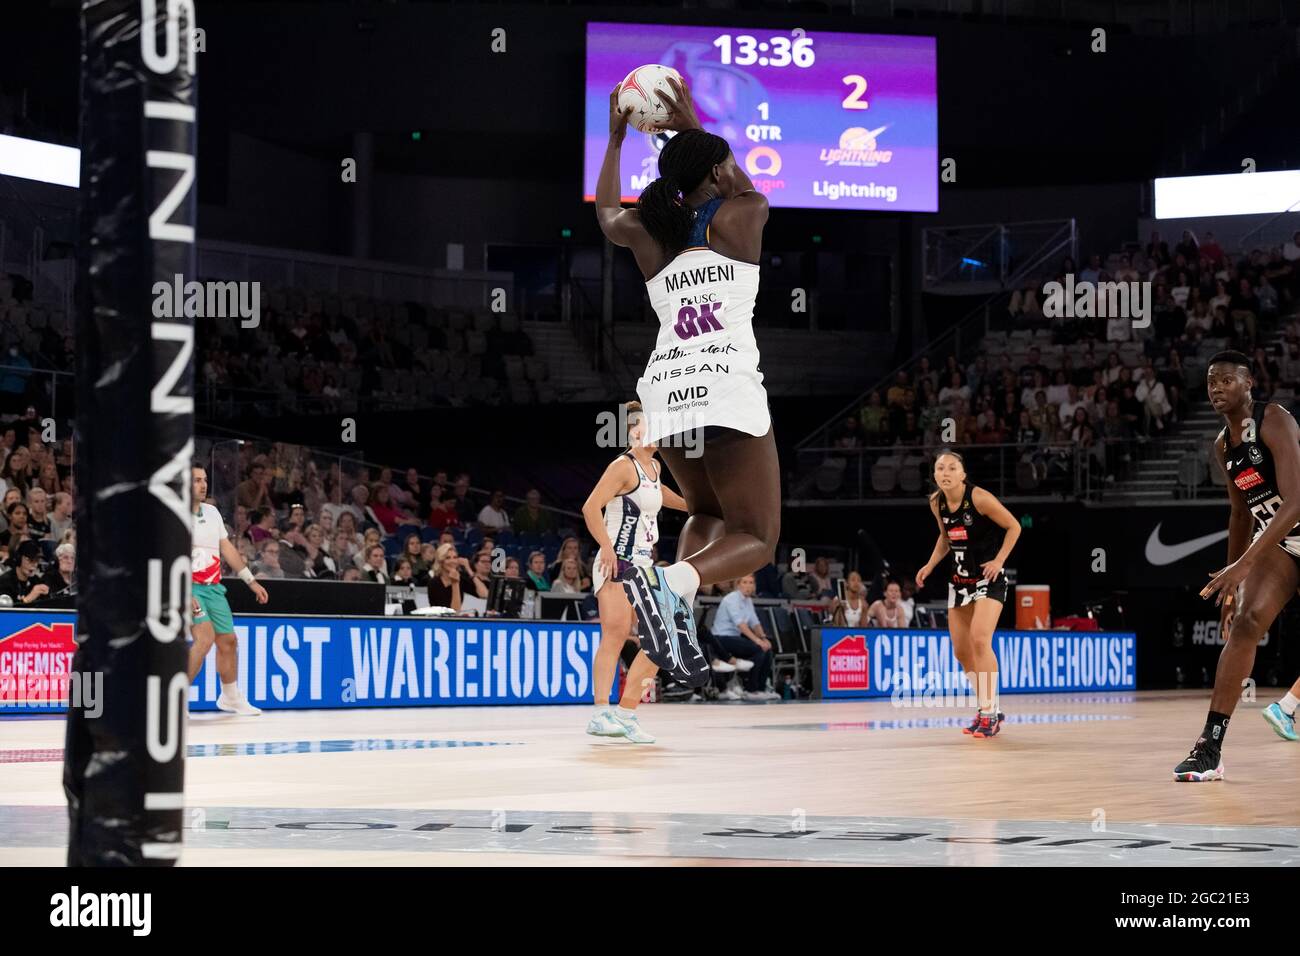 MELBOURNE, AUSTRALIA - MAY 01: Phumza Maweni of the Sunshine Coast Lightning grabs a the ball during the Suncorp Super Netball round one match between Collingwood Magpies and Sunshine Coast Lightning on May 01, 2021 at John Cain Arena in Melbourne, Australia.  Credit: Michael Currie/Speed Media/Alamy Live News Stock Photo